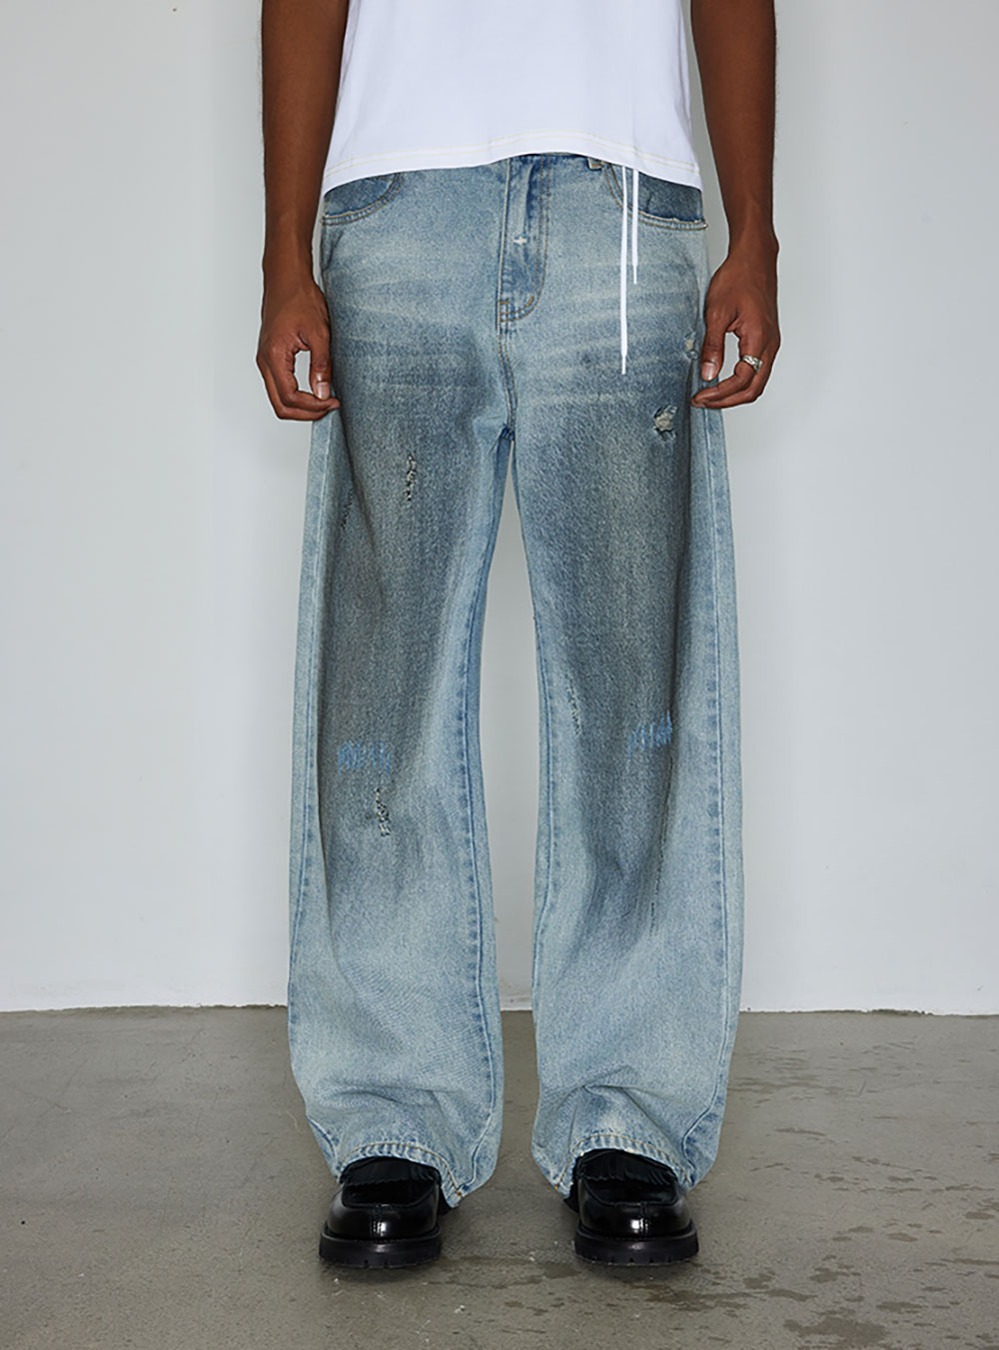 [CRICLE CAGE] Washed out damage light blue denim pants